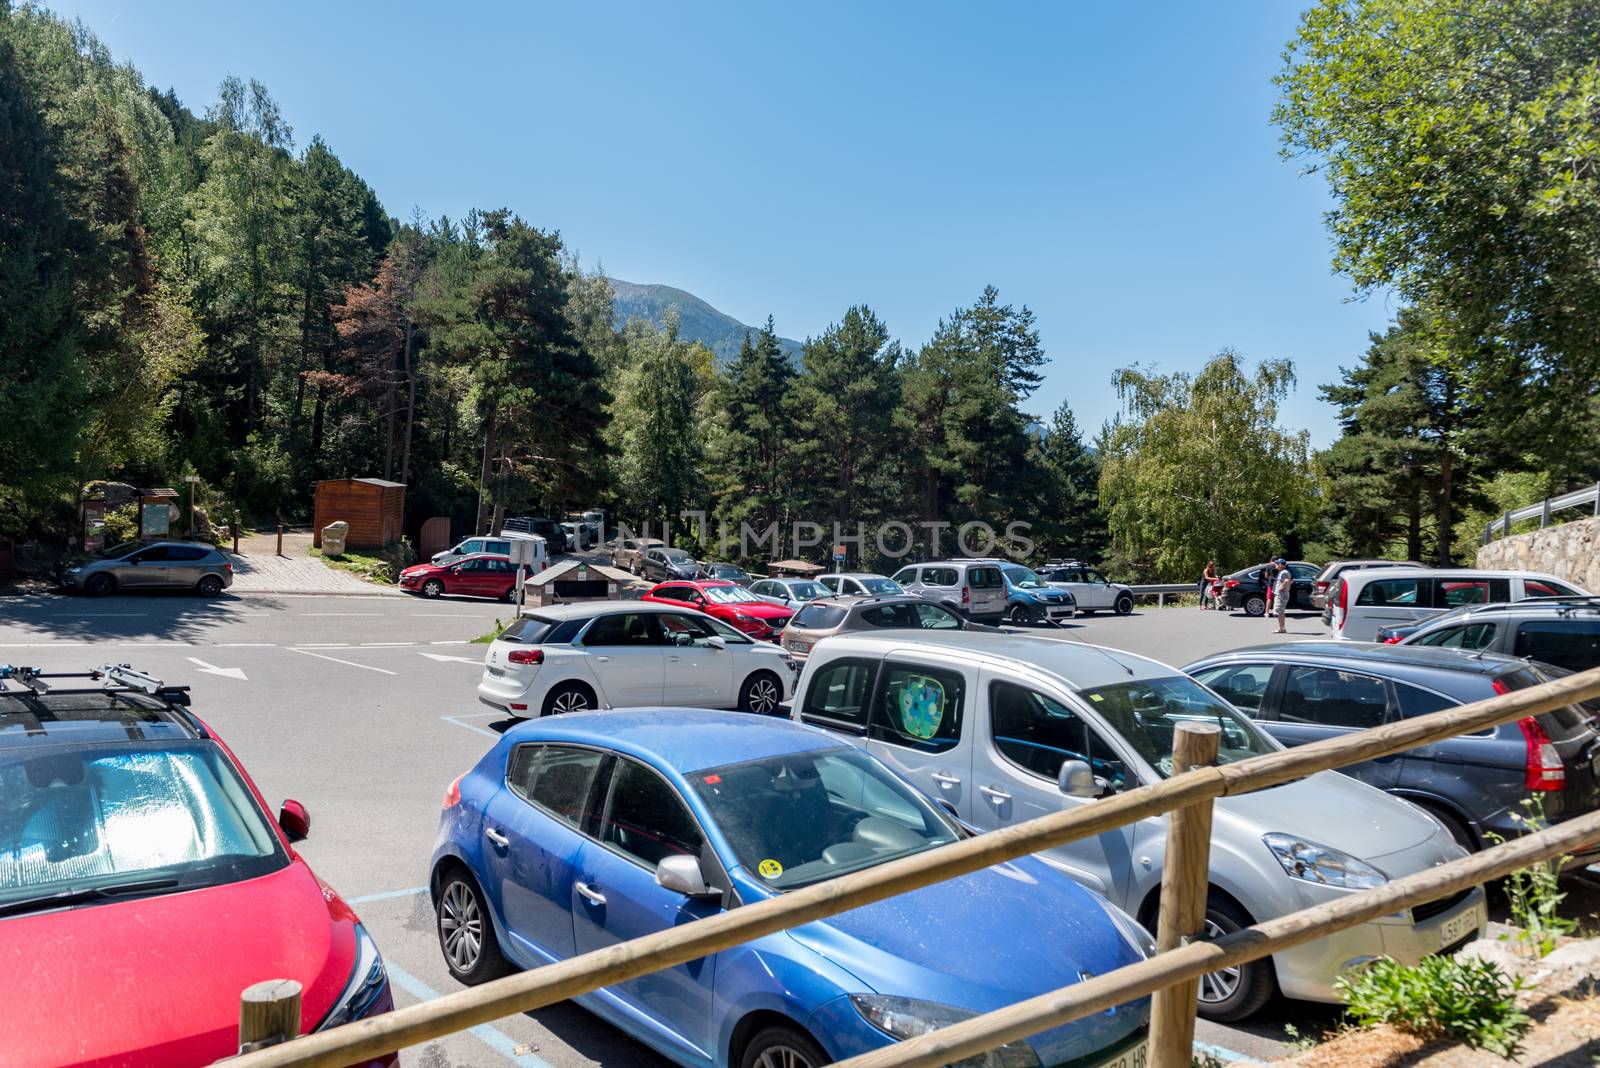 Escaldes Engodany, Andorra : 20 August 2020 : Cars parked in the Engolasters lake parking in Escaldes Engordany, Andorra in summer 2020